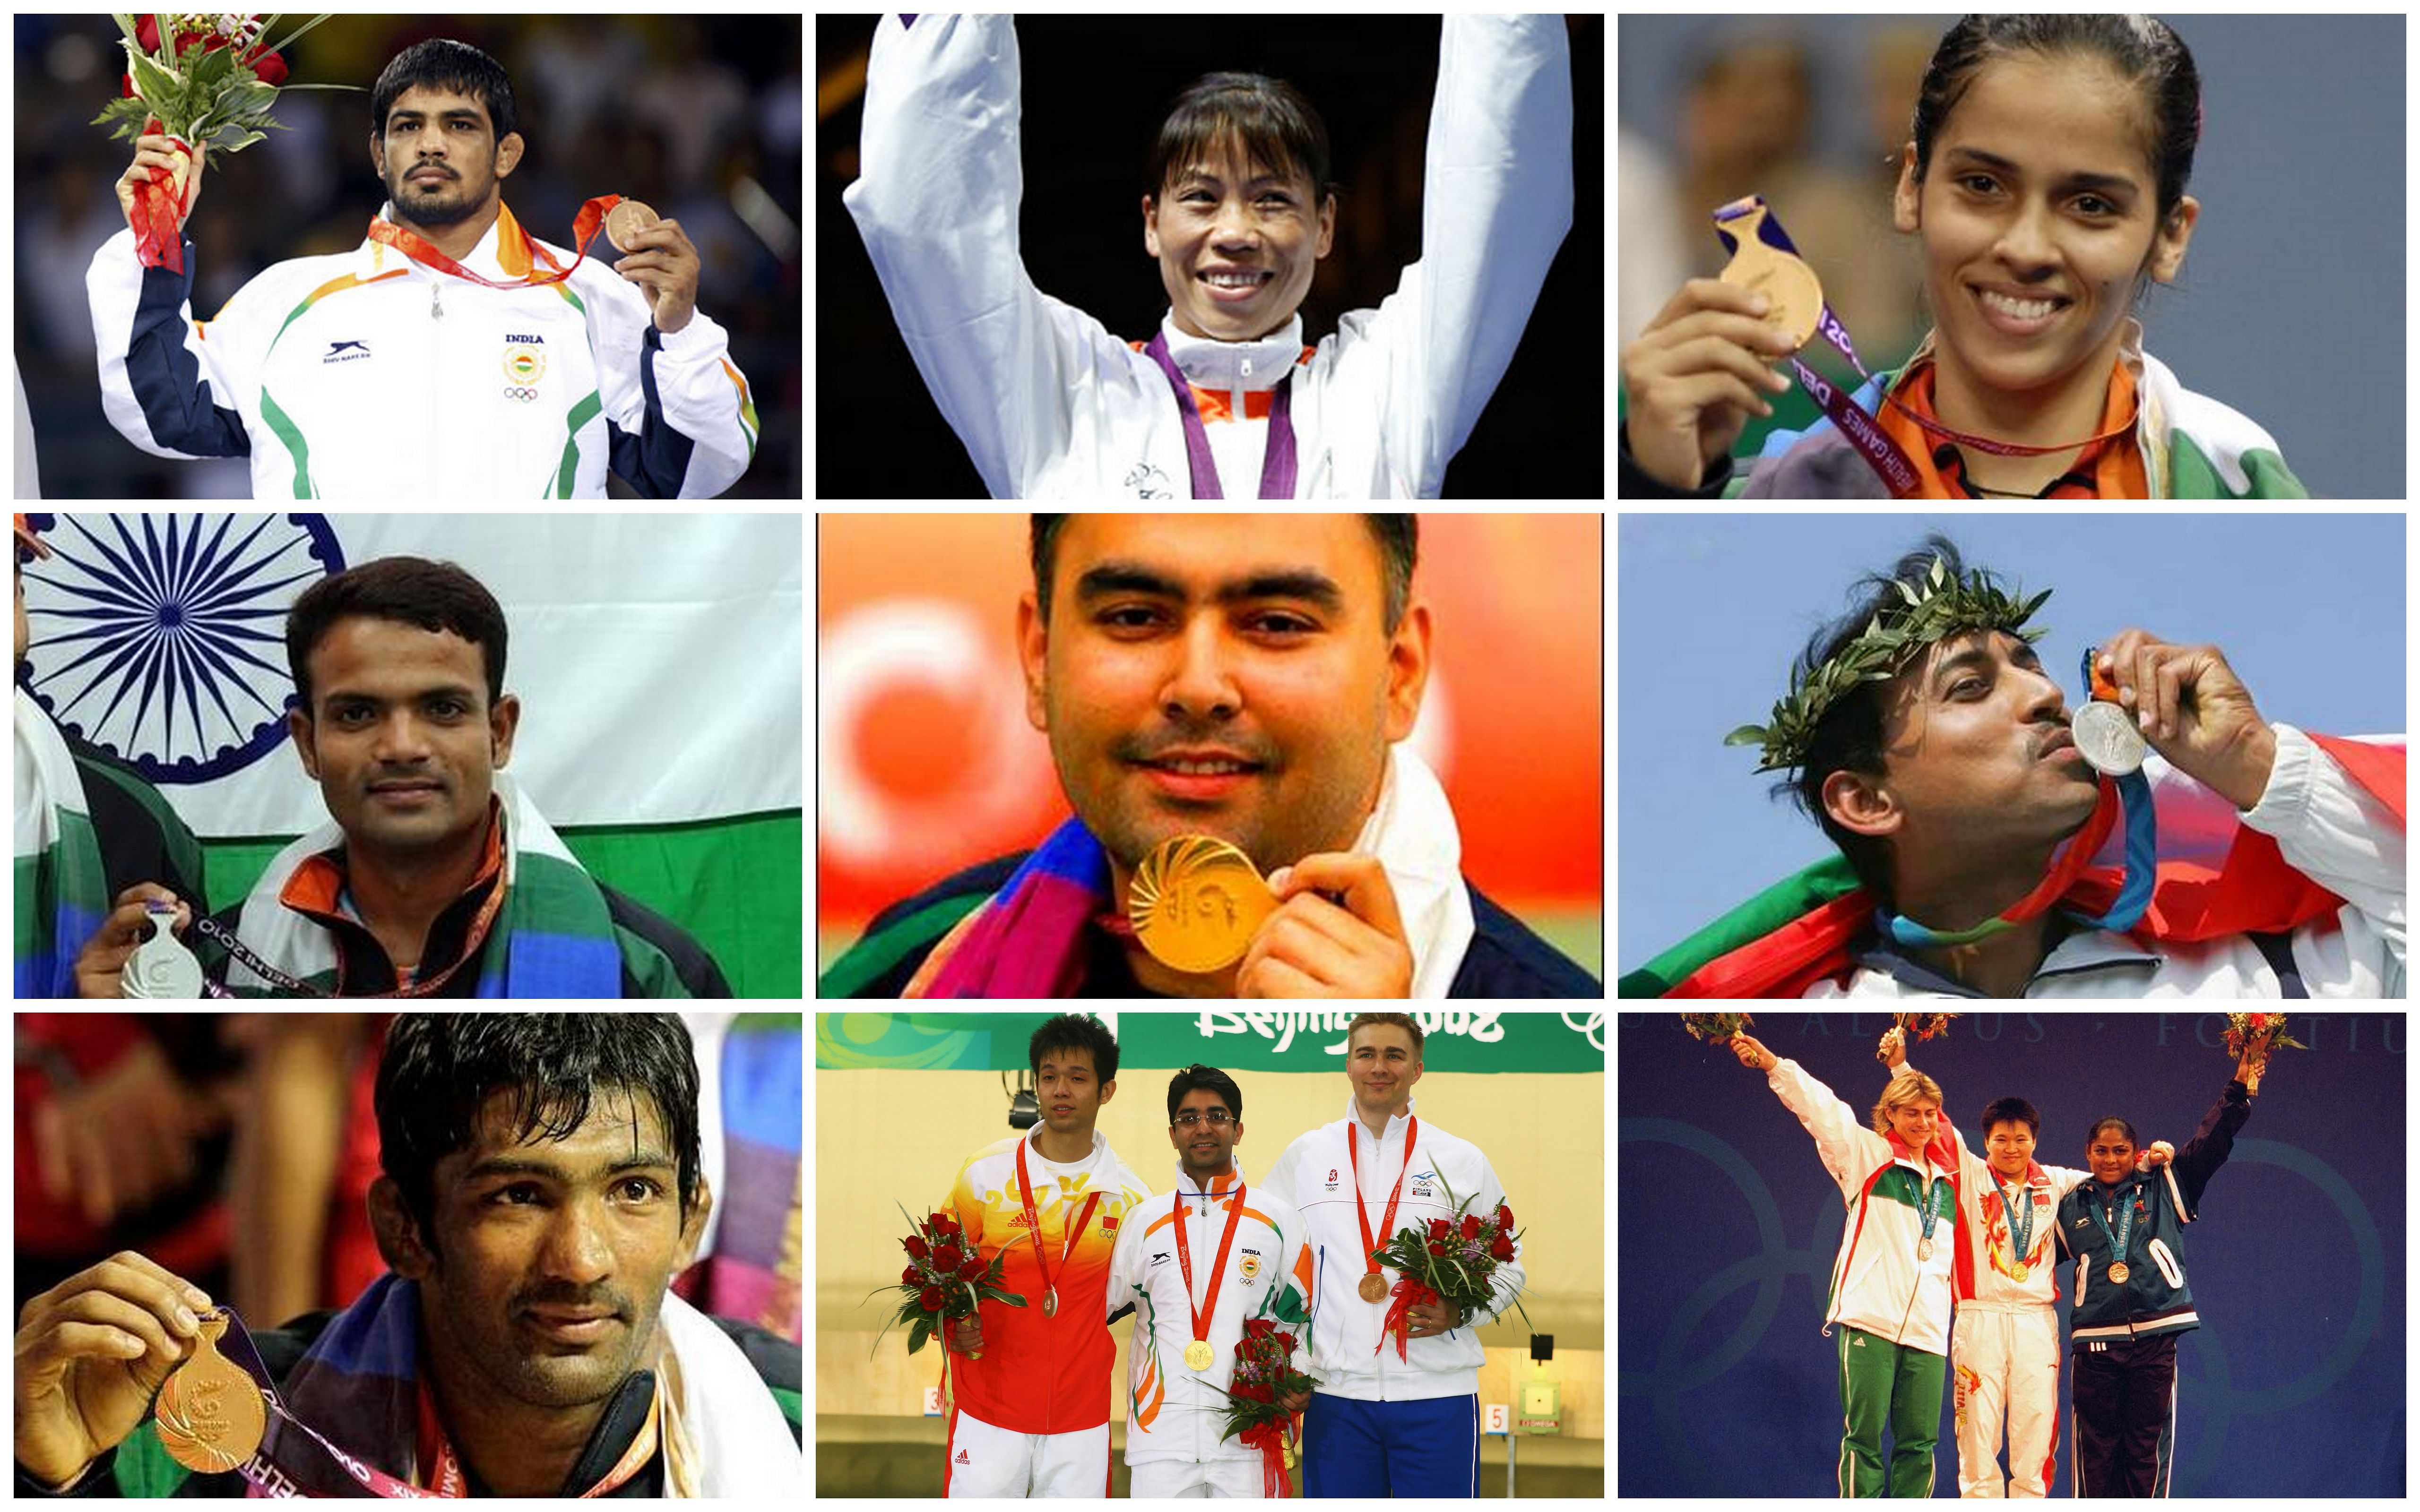 Page 2 - 12 photos of Indian sports achievements that will make you